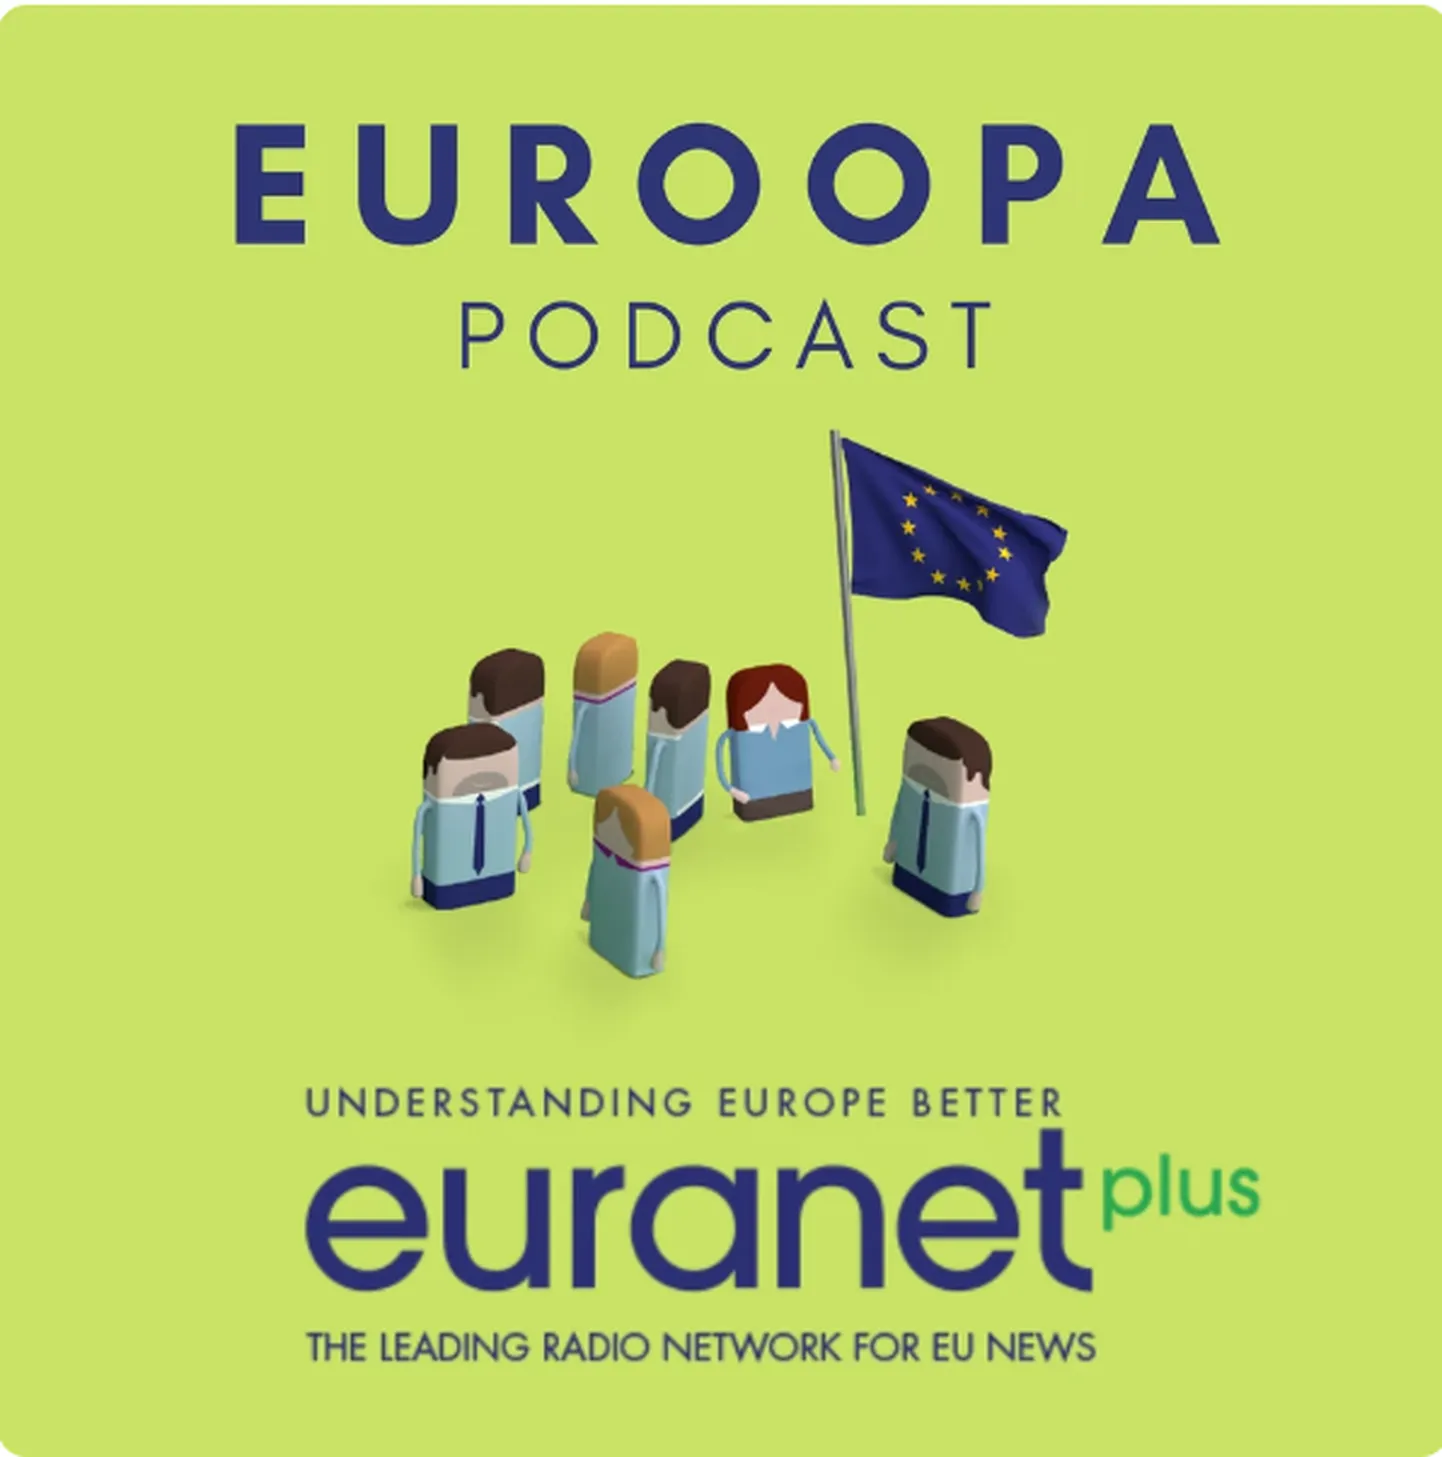 Euroopa podcast.